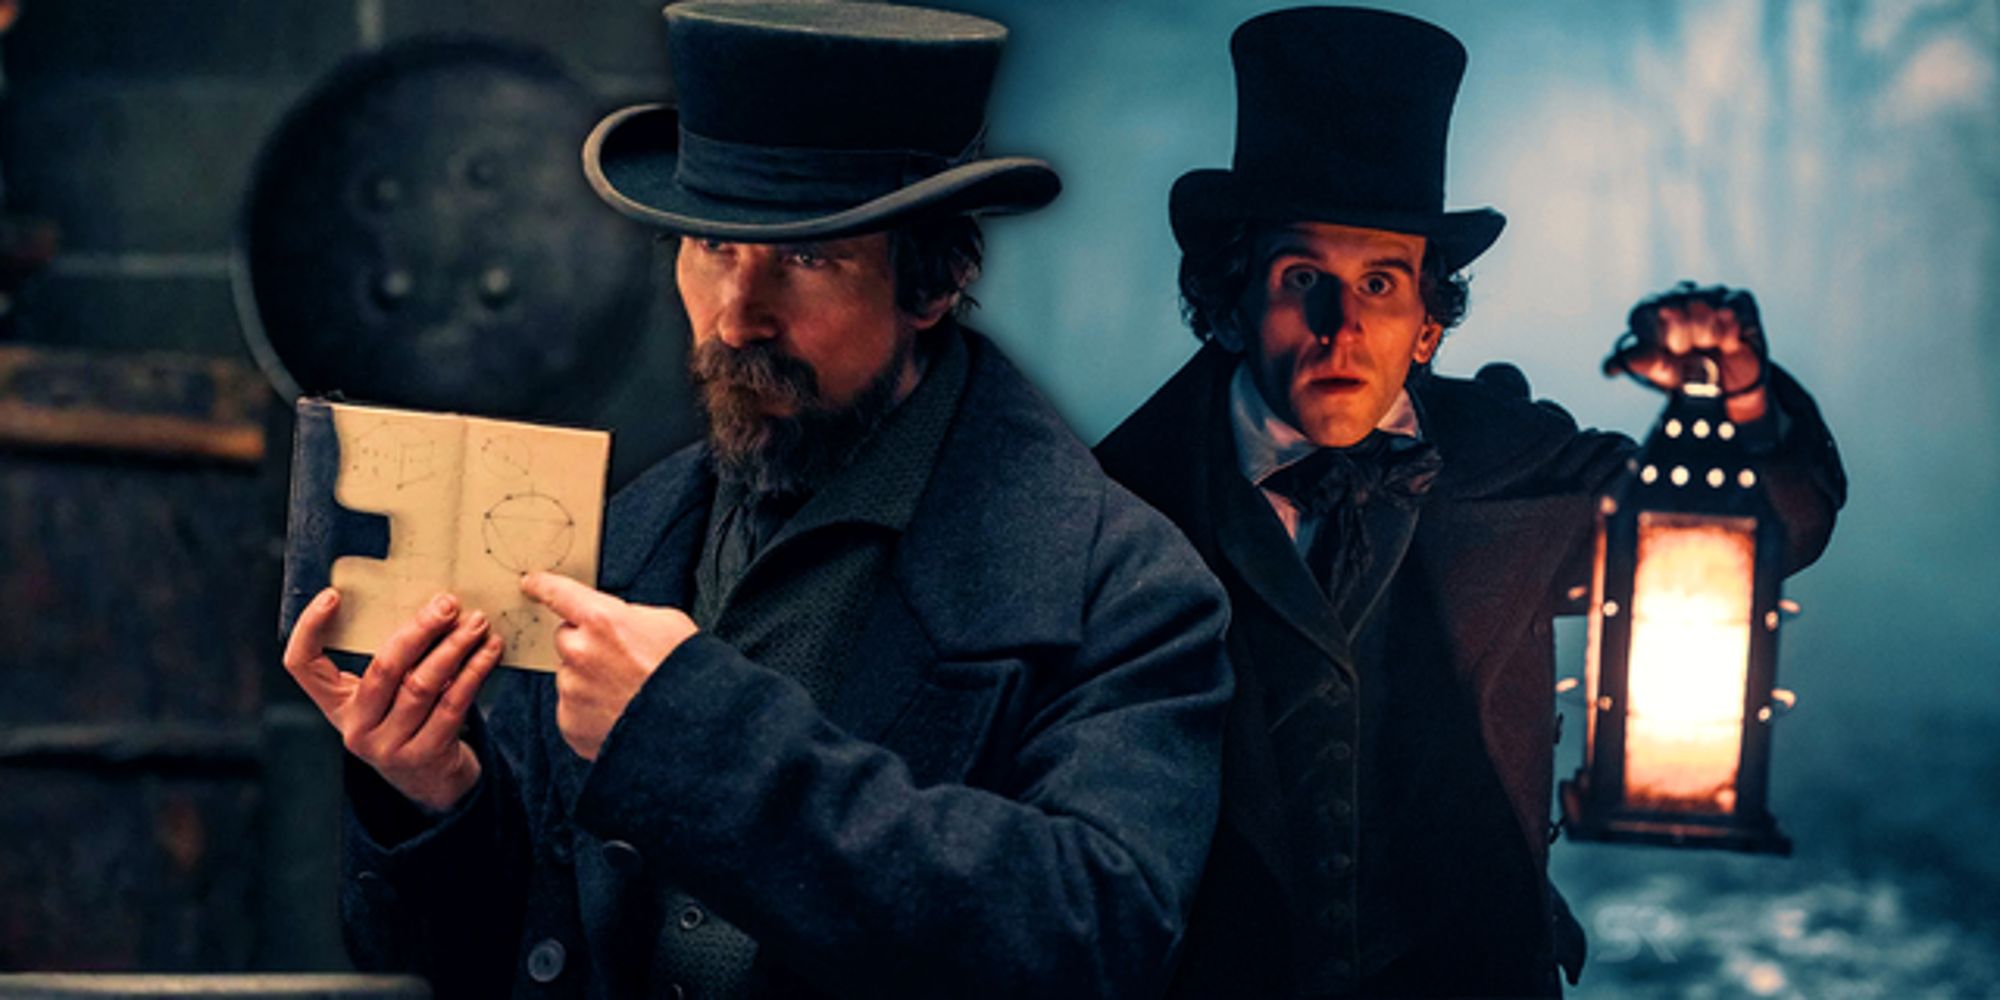 Collage of Gus-Landor (Christian Bale) and Edgar Allen Poe (Harry Melling) in The Pale Blue Eye